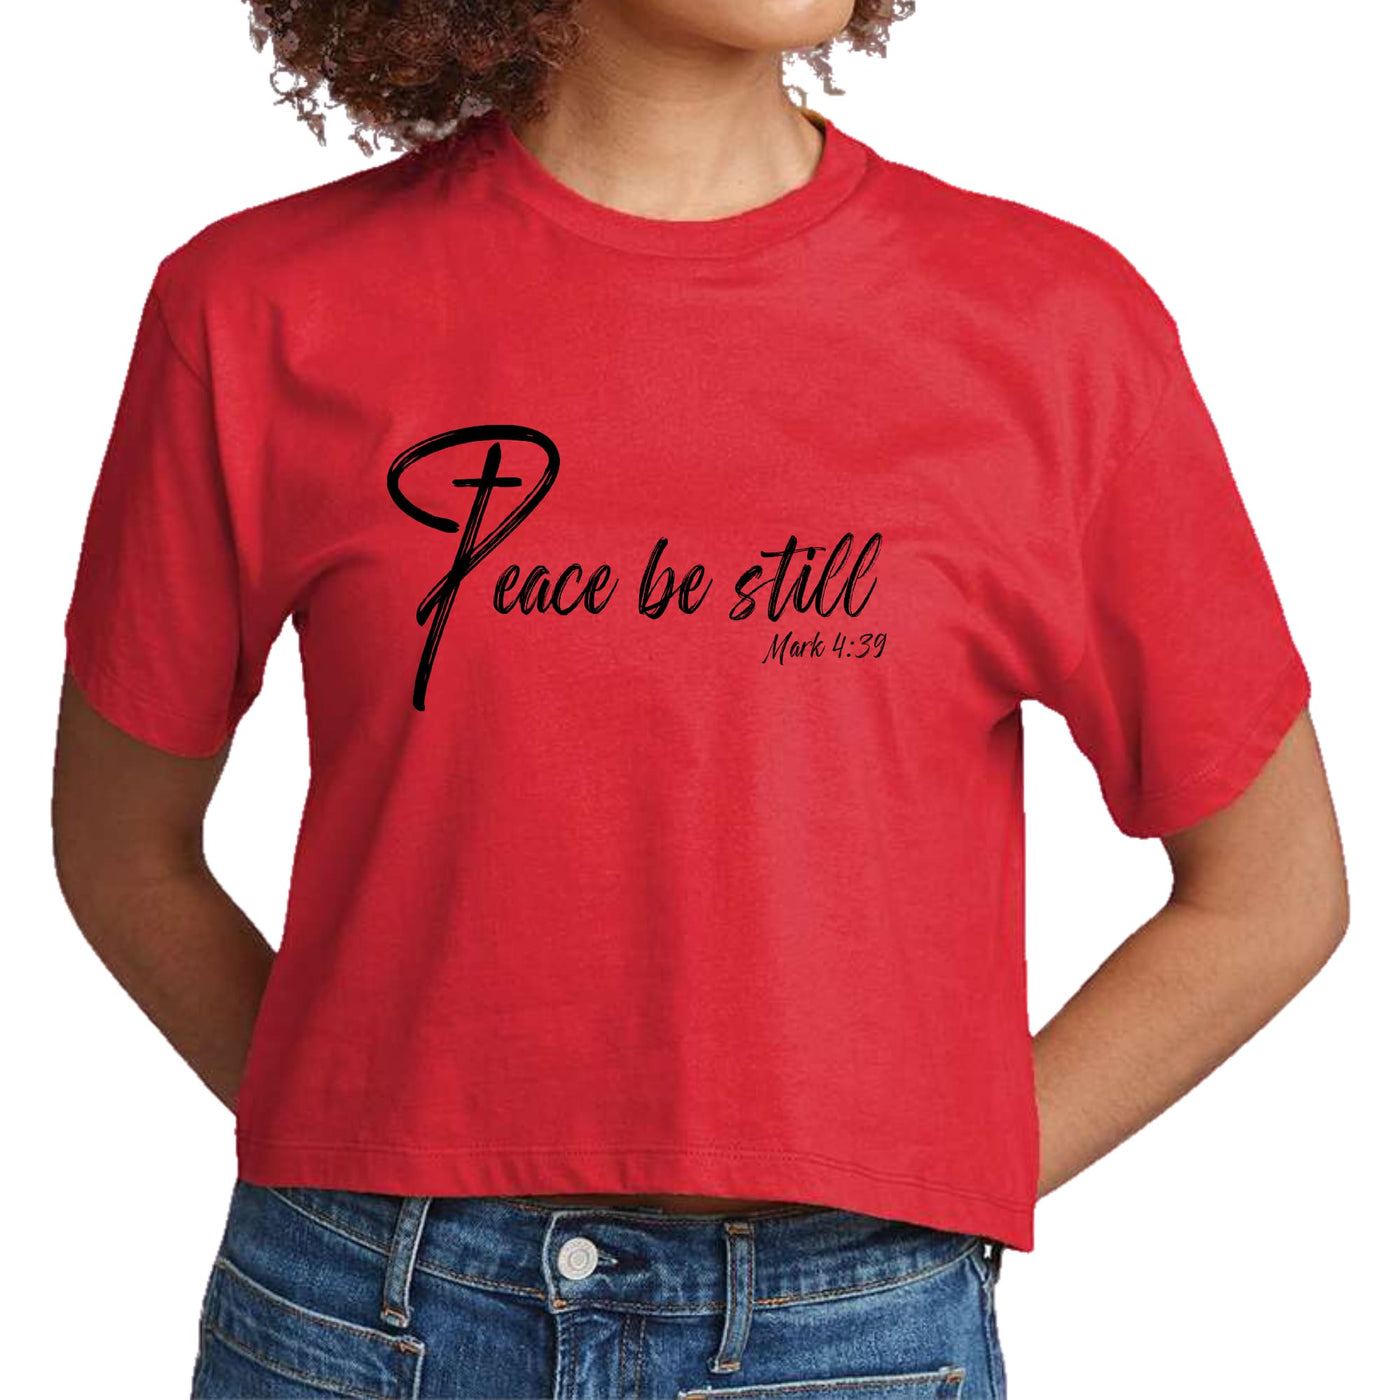 Womens Cropped Graphic T-shirt Peace Be Still Inspirational - Womens | T-Shirts